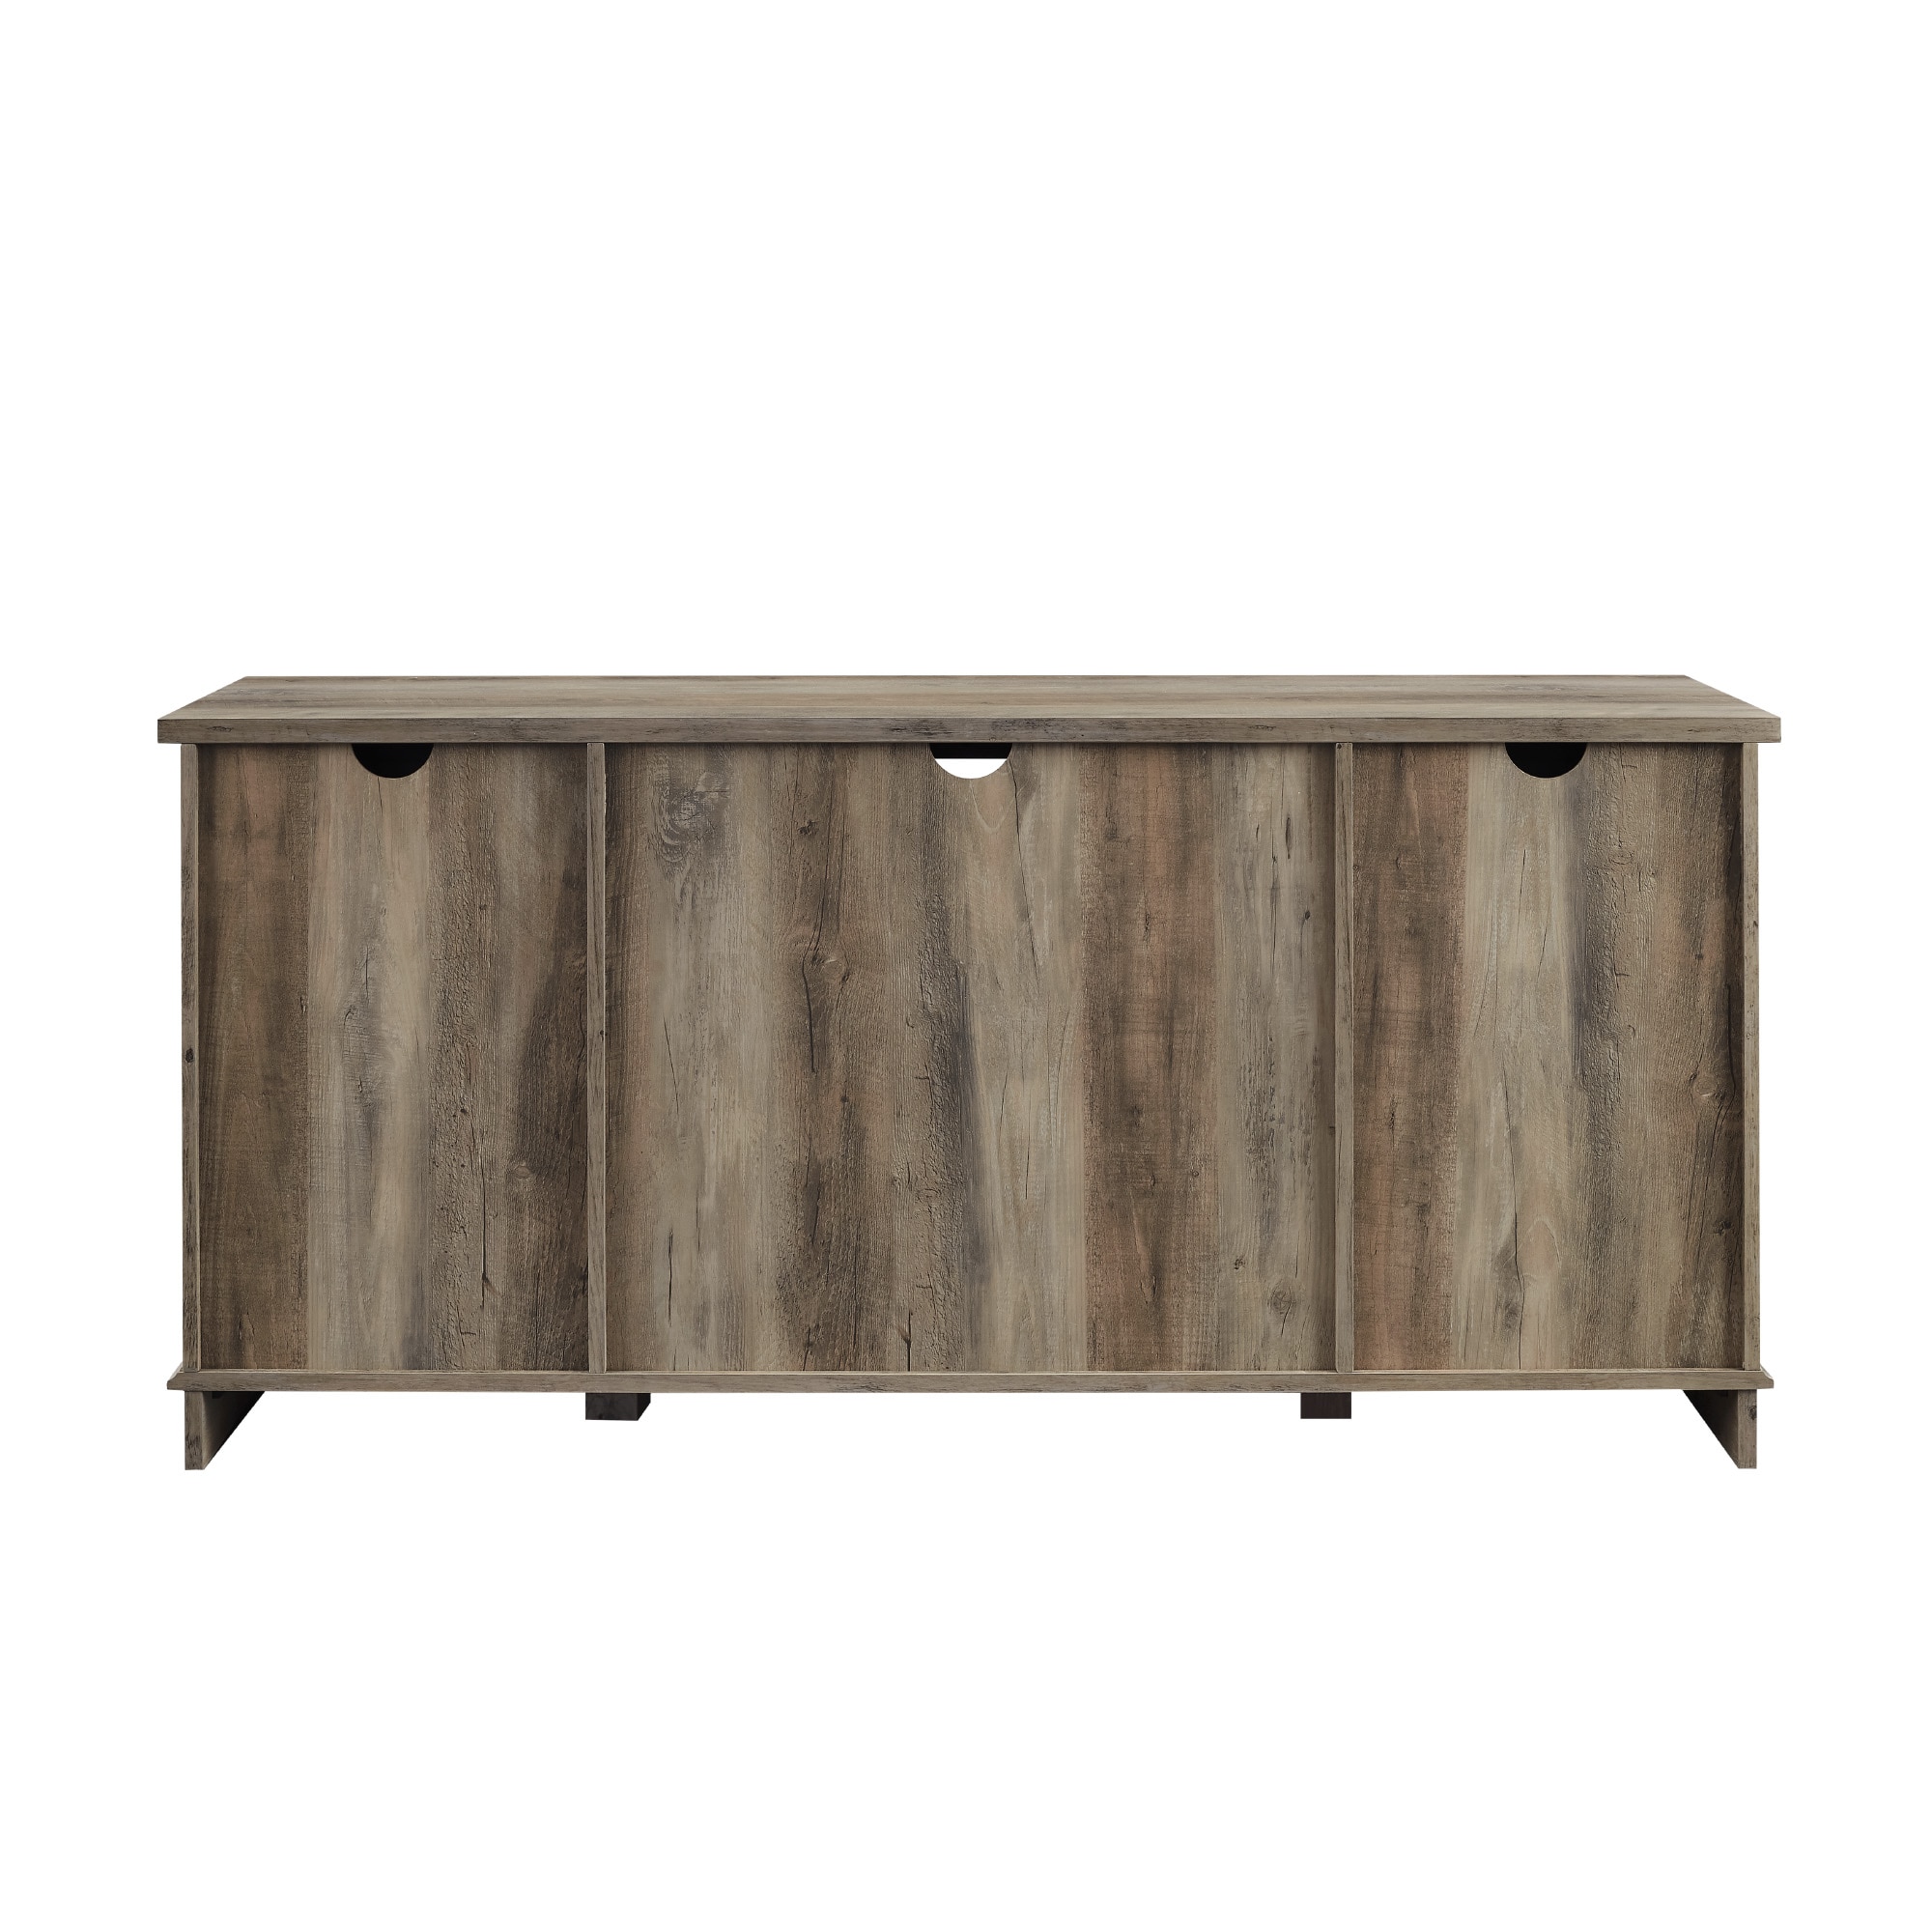 Walker Edison Transitional Grey Wash Tv Stand (Accommodates TVs up to ...